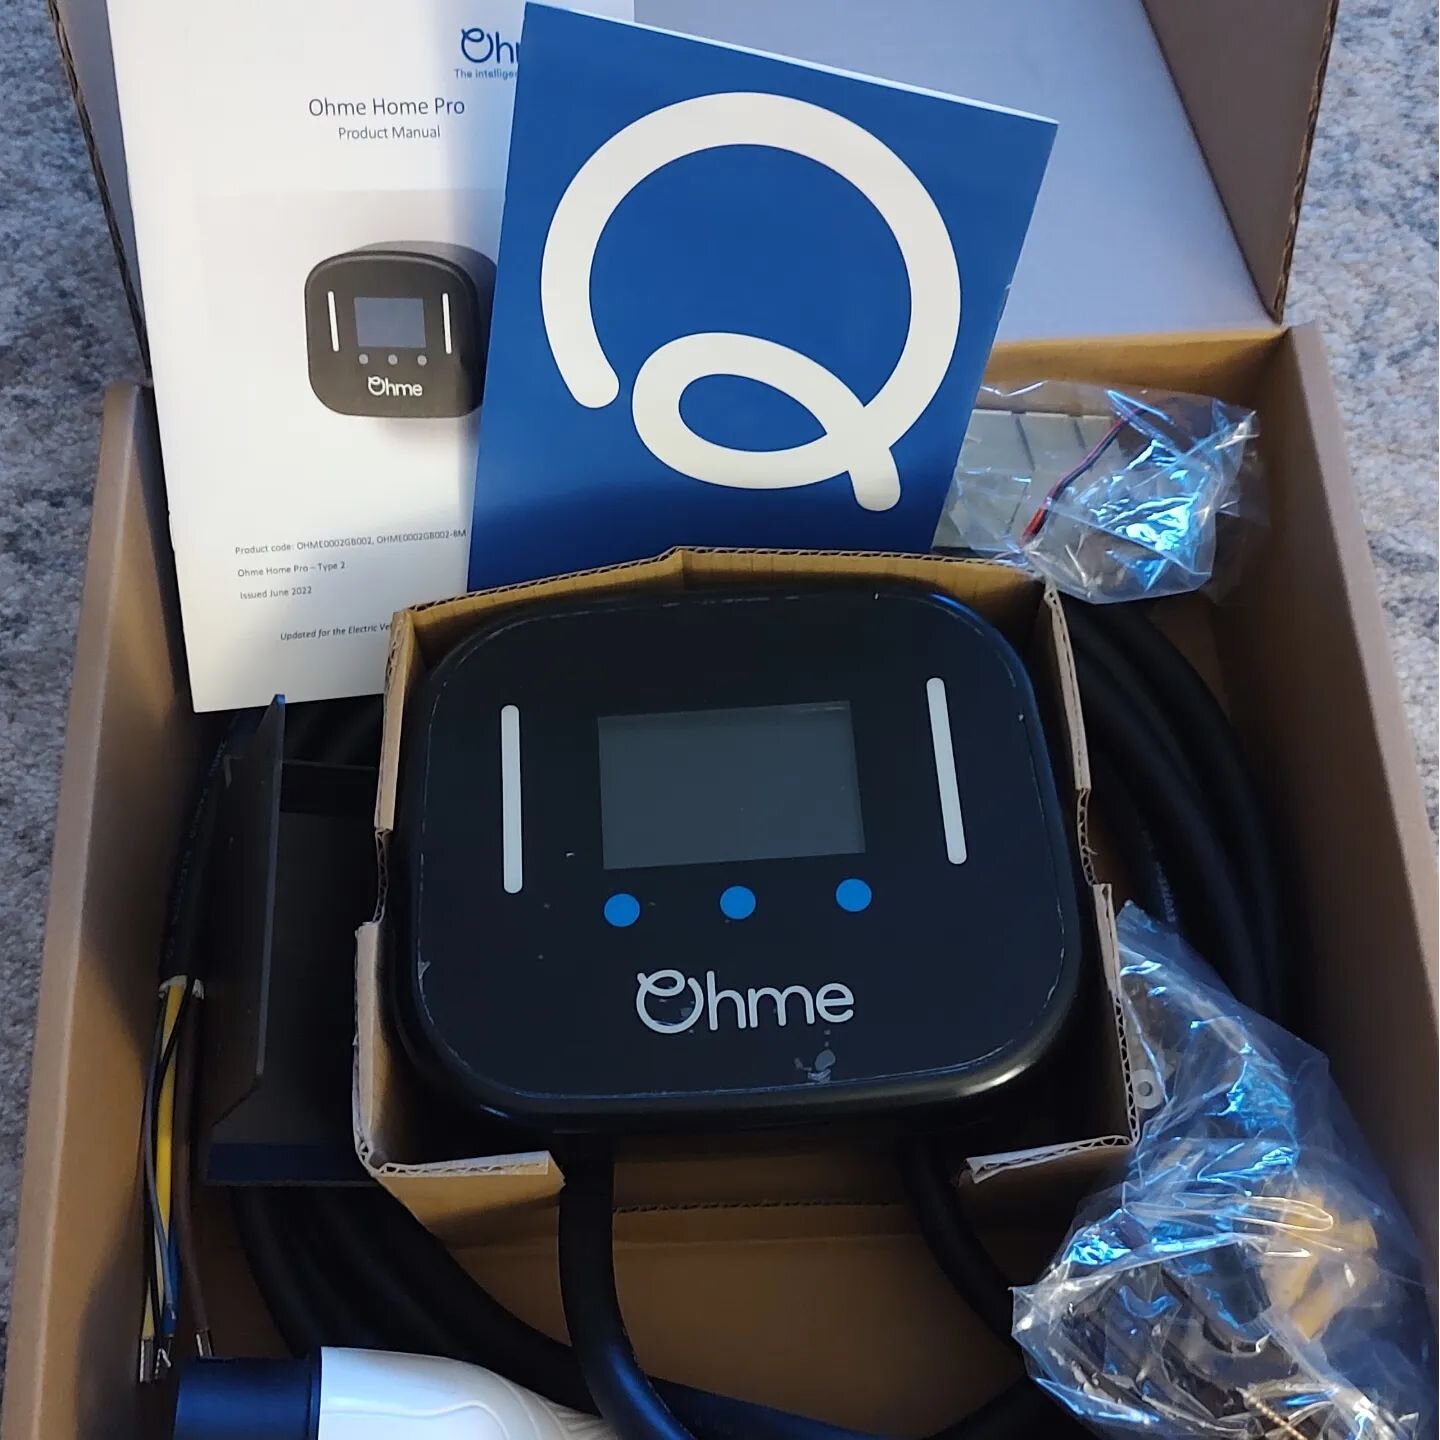 @ohmeev ready to install tomorrow in Daventry, Northamptonshire #ev #evchargermidlands #evchargernorthampton #evnorthampton #evchargerbedford #evmiltonkeynes #electricvehiclenorthamptonshire #electricvehicle #electricvehiclemiltonkeynes